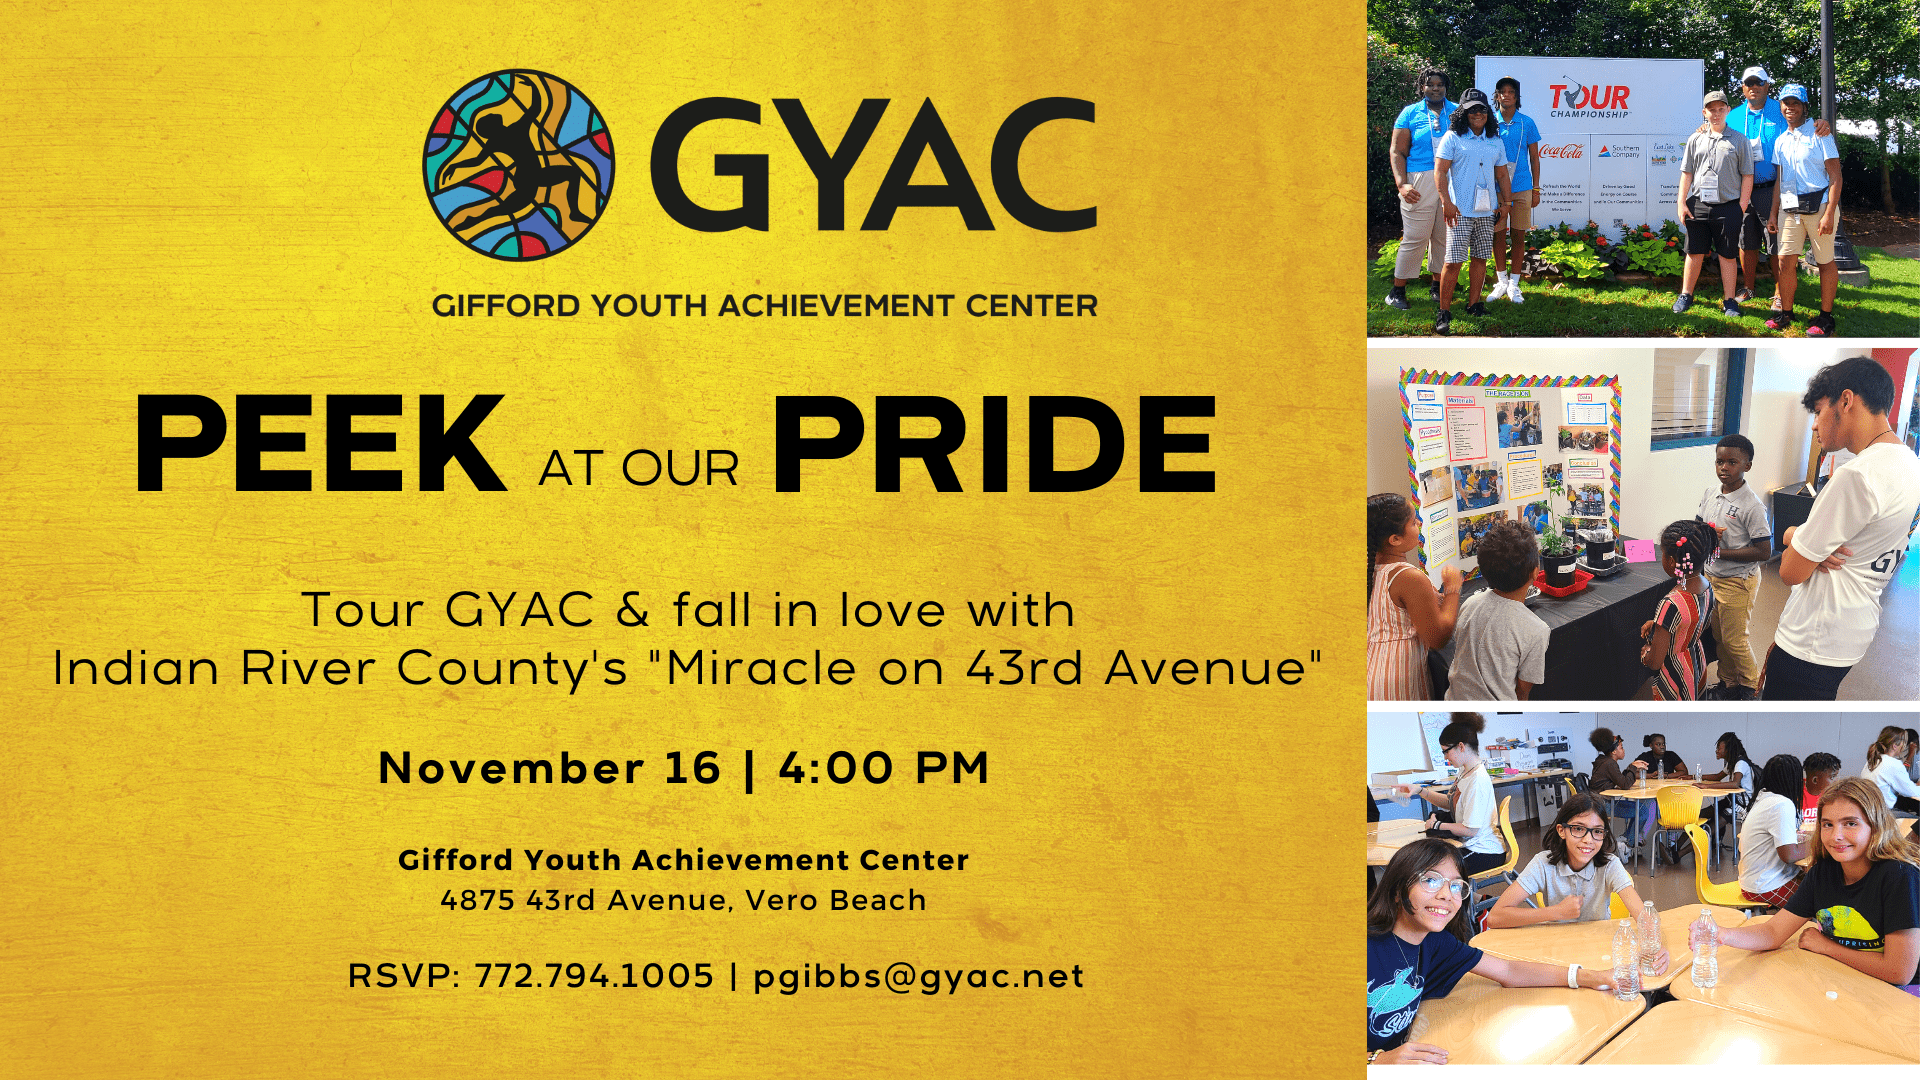 Fall in Love with GYAC during ‘Peek at our Pride’ Tour on November 16